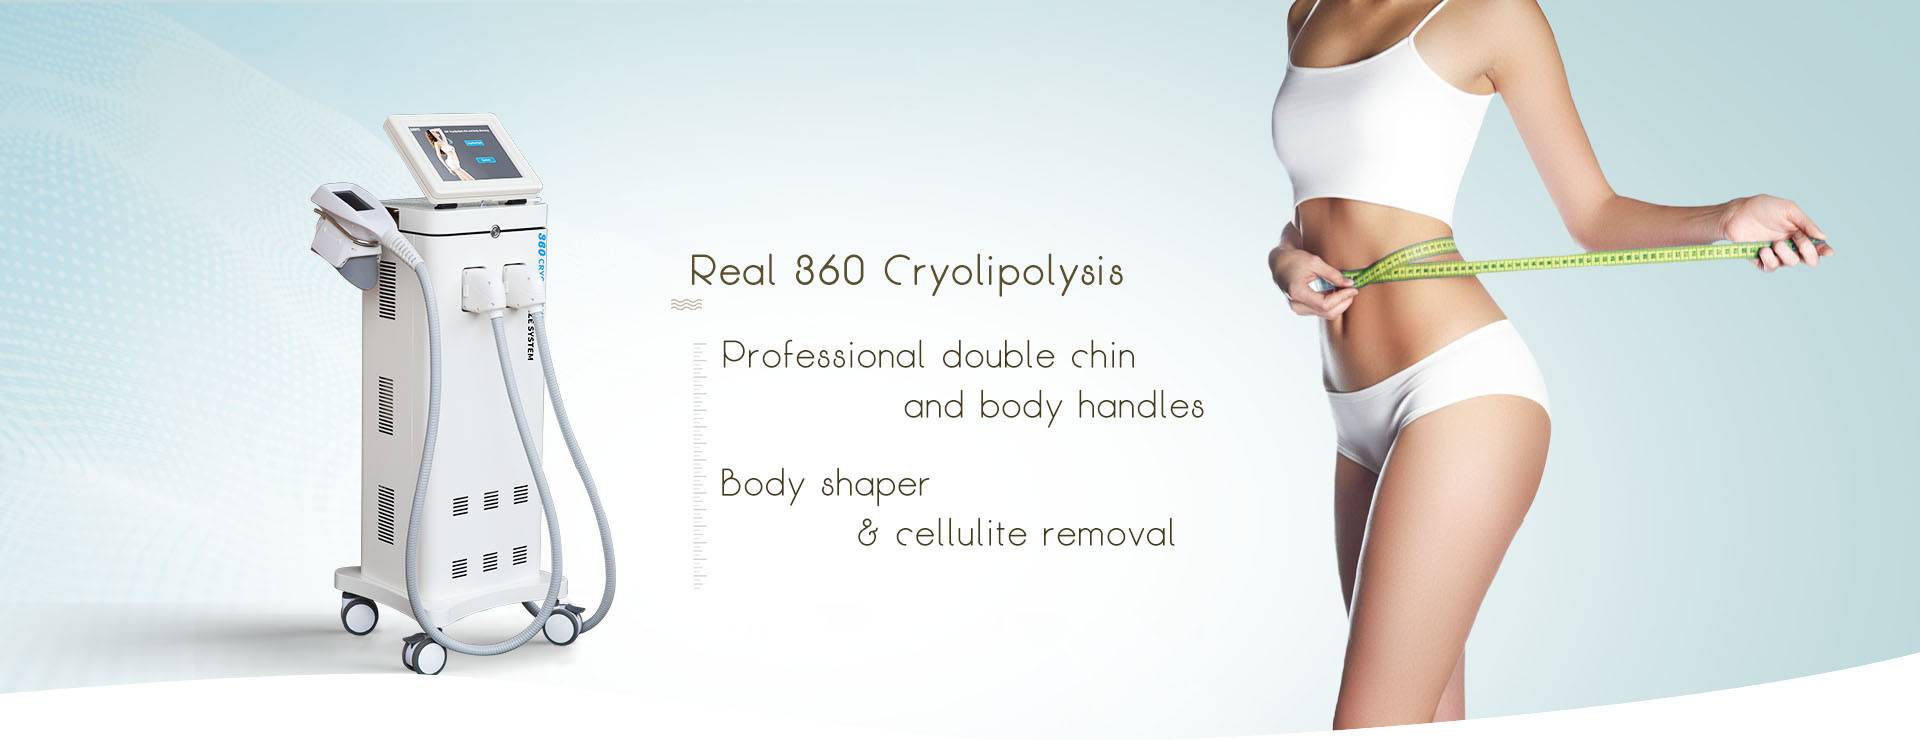 DANYE 2020 NEW 360 Cryolipolysis chin and body slimming DY-Magia3 